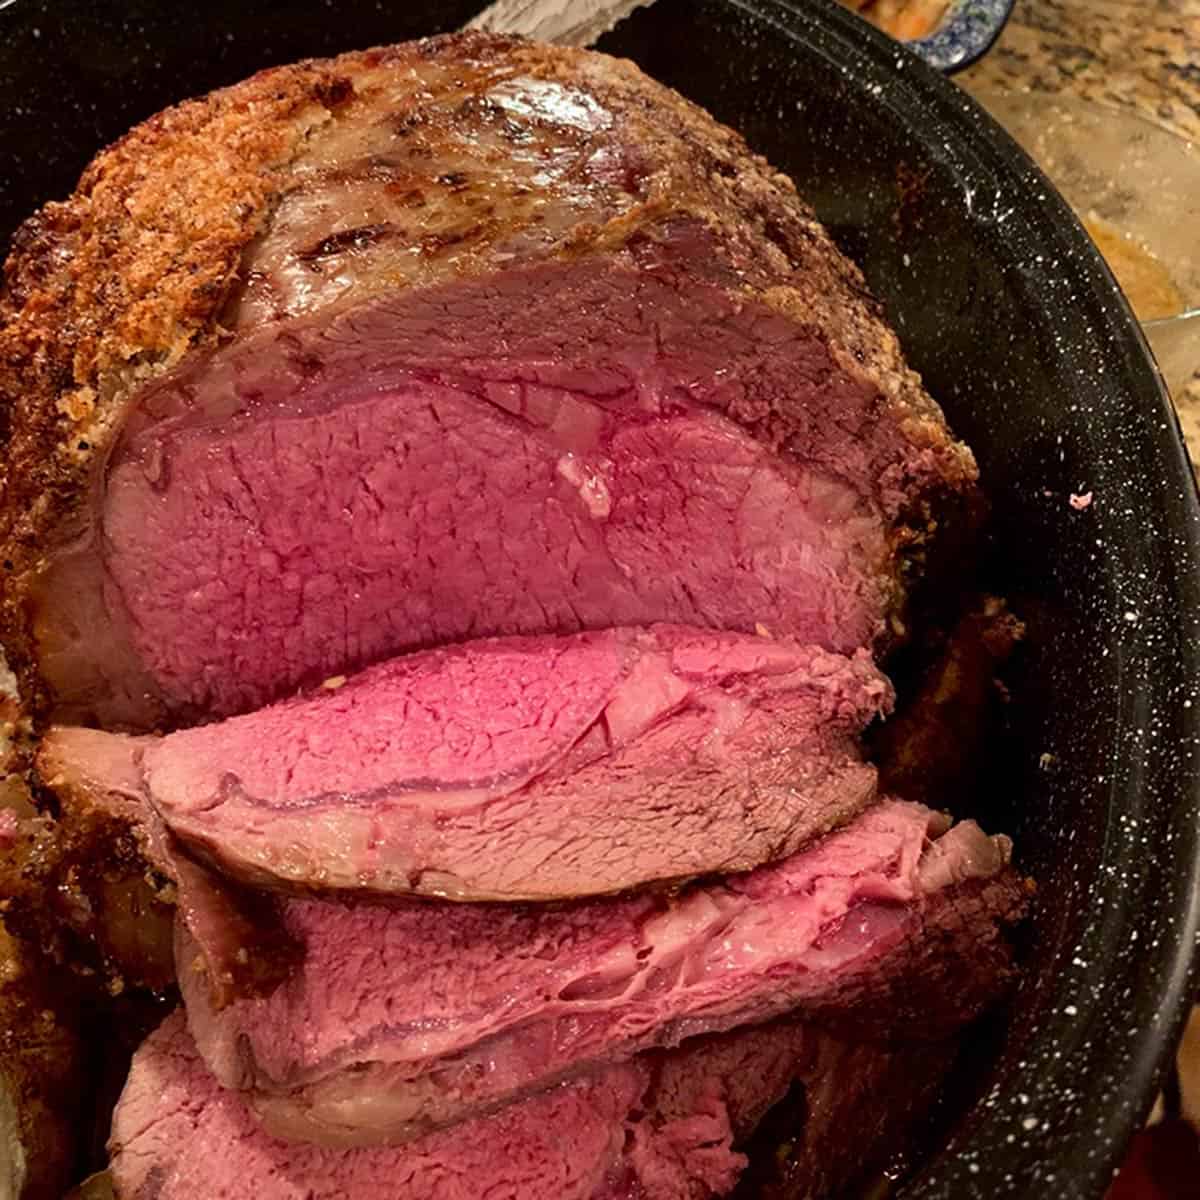 A boneless prime rib of beef roasted to medium-rare, in a roaster.